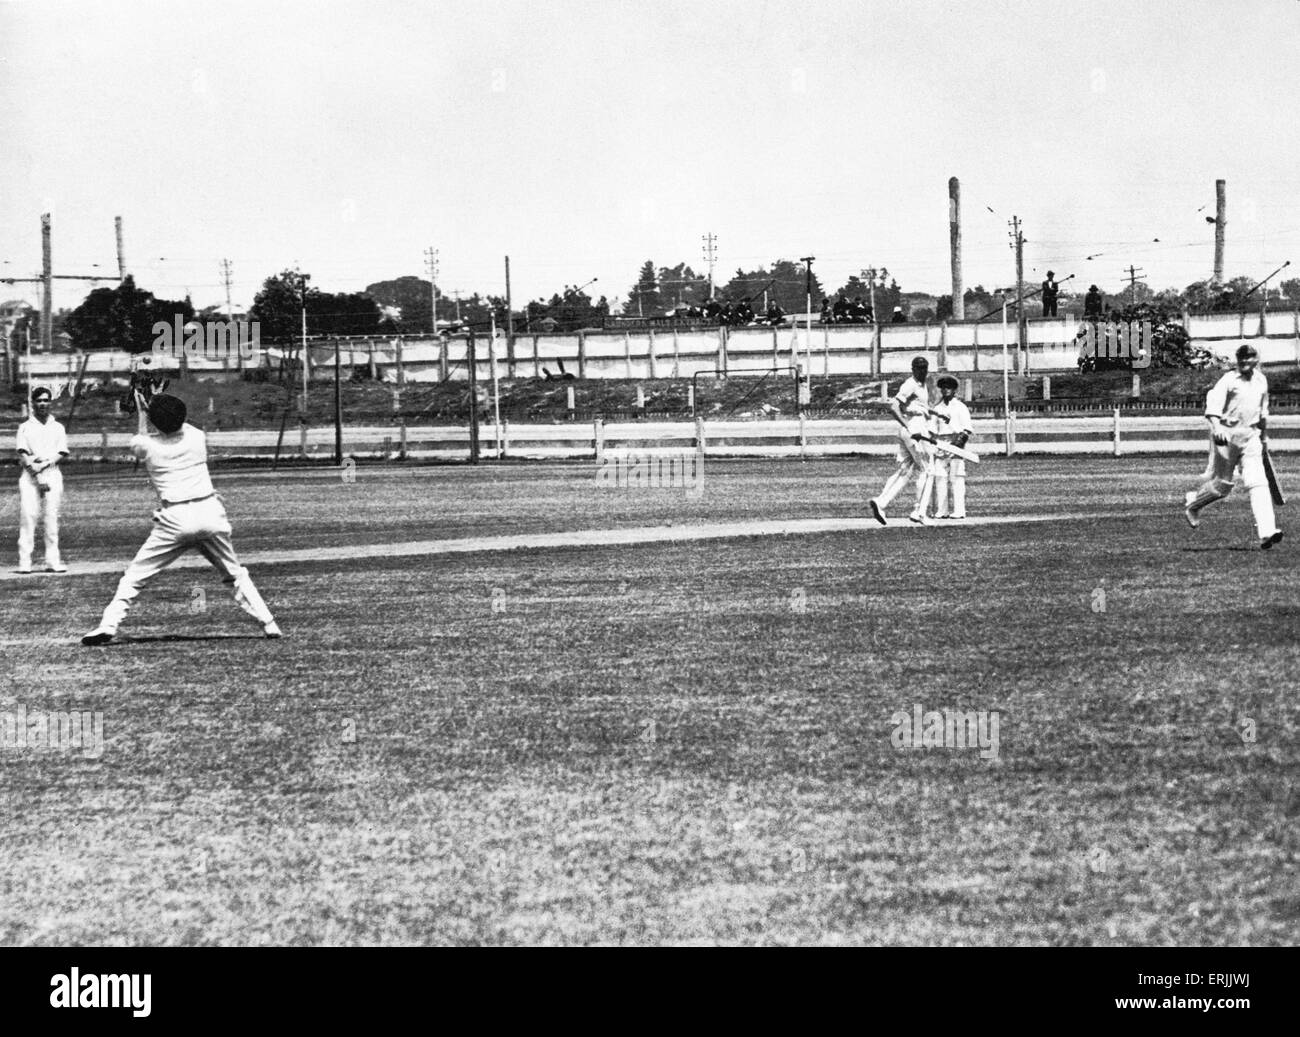 England tour of Australia for the Ashes 1928 - 1929. In preparation for the Ashes series, England played Western Australia in Perth in October 1928, and drew a three-day game.  Pictured: Western AustraliaÕs Arthur Richardson caught Percy Chapman off Walter EvanÕs bowling - and Chapman was on his way to the pavilion before the ball was in RichardsonÕs hands.  October 1928. Stock Photo